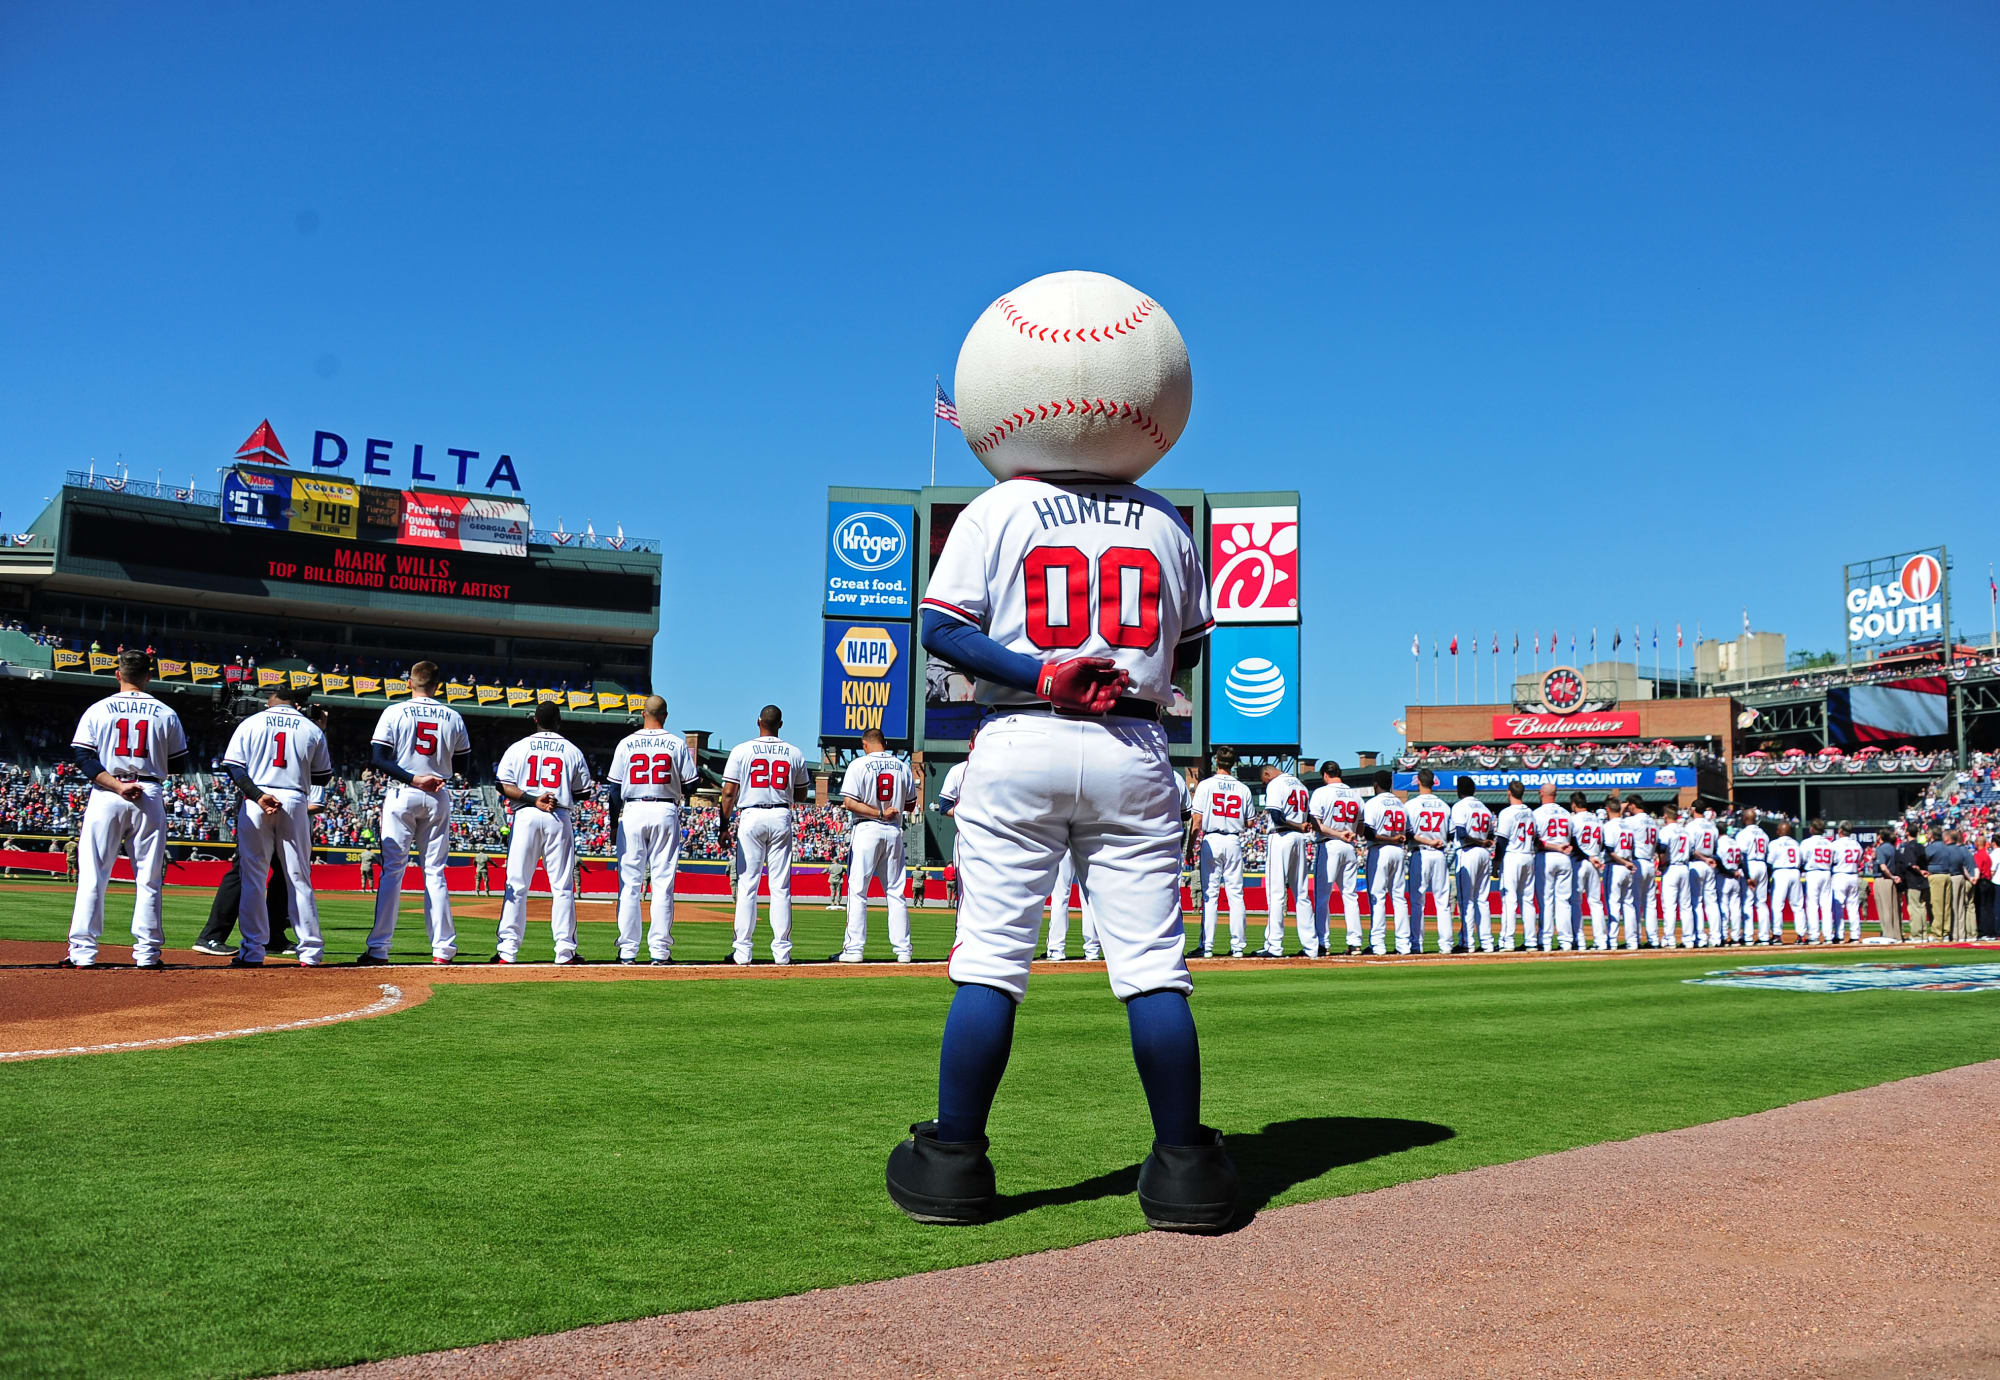 Homer is a Fraud: A Look at Braves Alternative Mascot Ideas